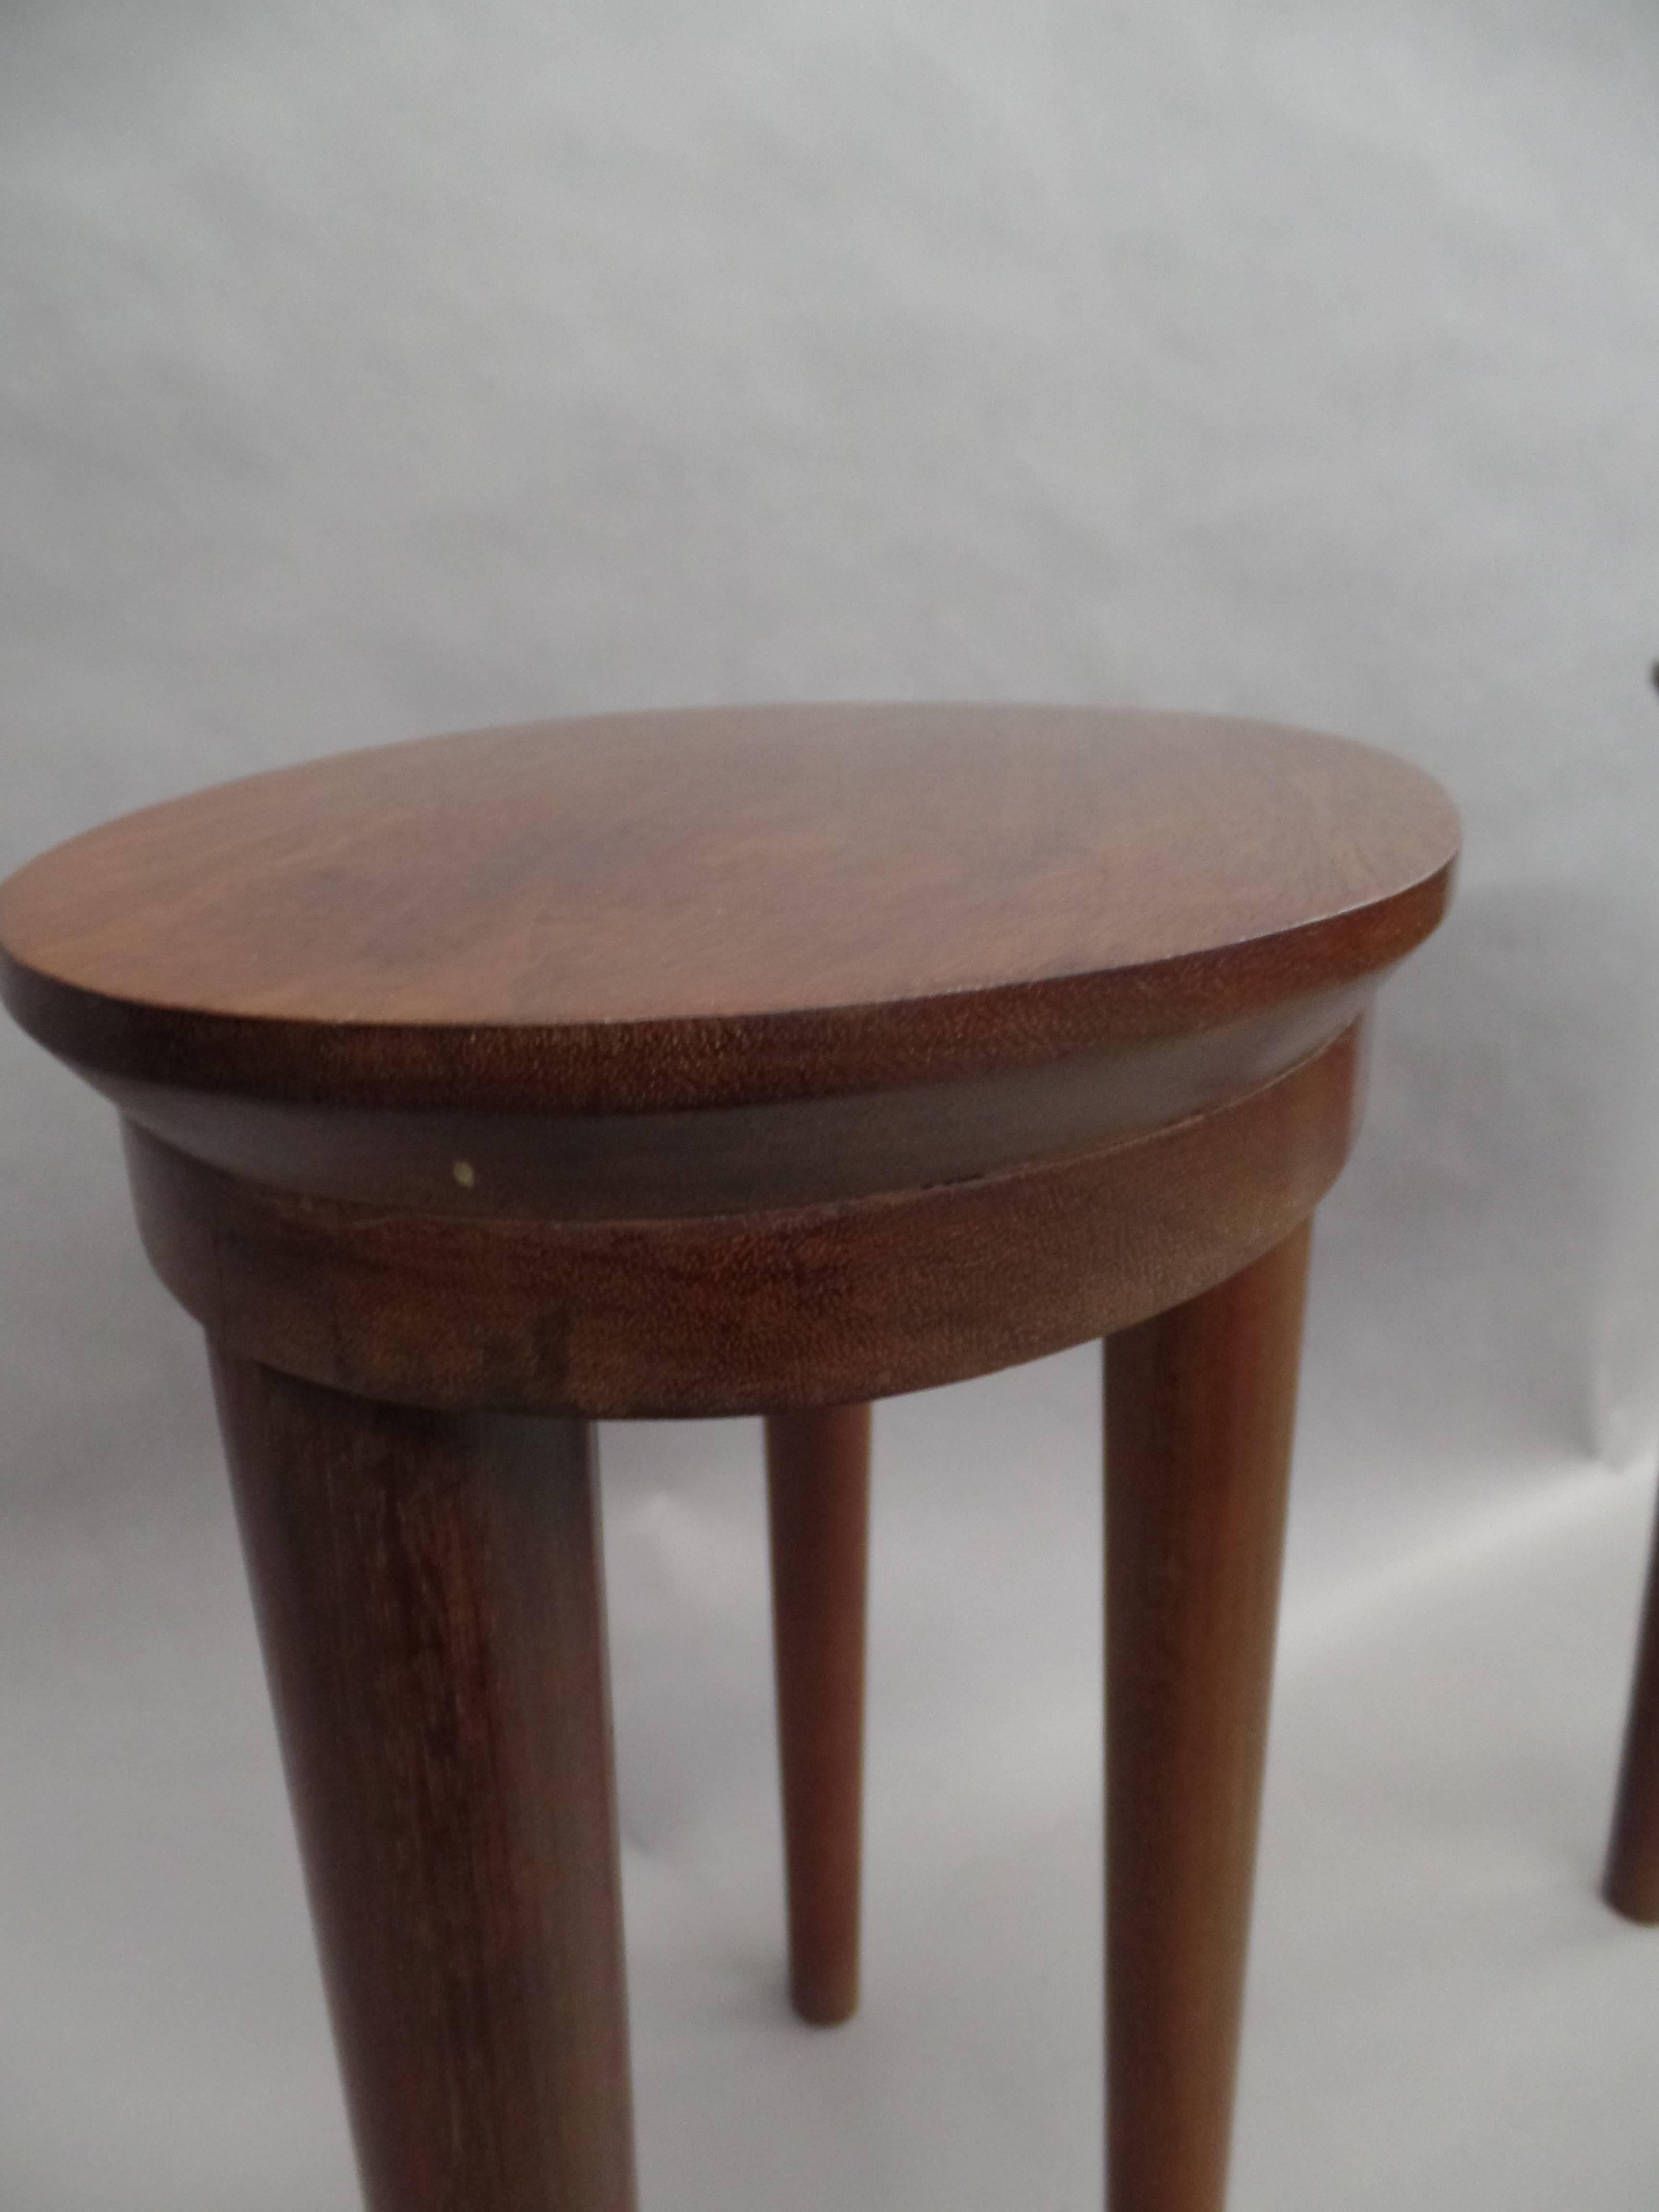 Pair of French Colonial Solid Teak Side Tables / Consoles / Nightstands, 1930 For Sale 3